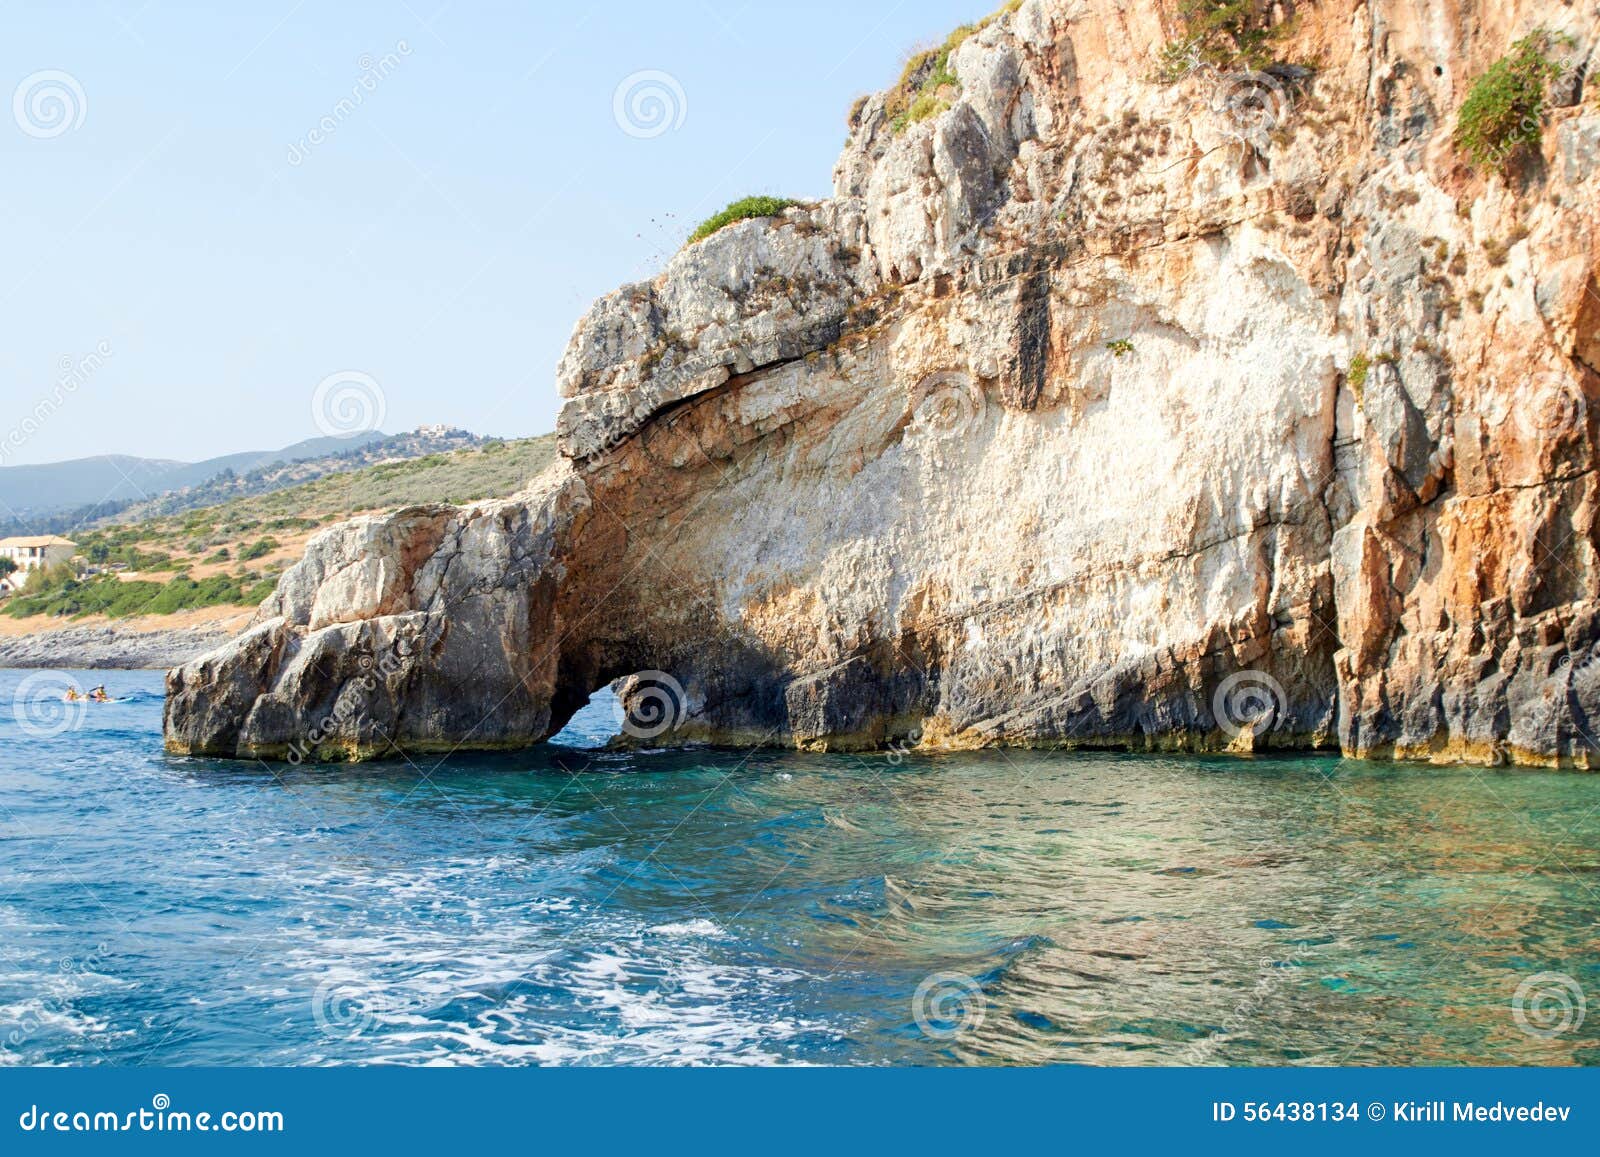 blue caves at bright sunny day zakinthos greece